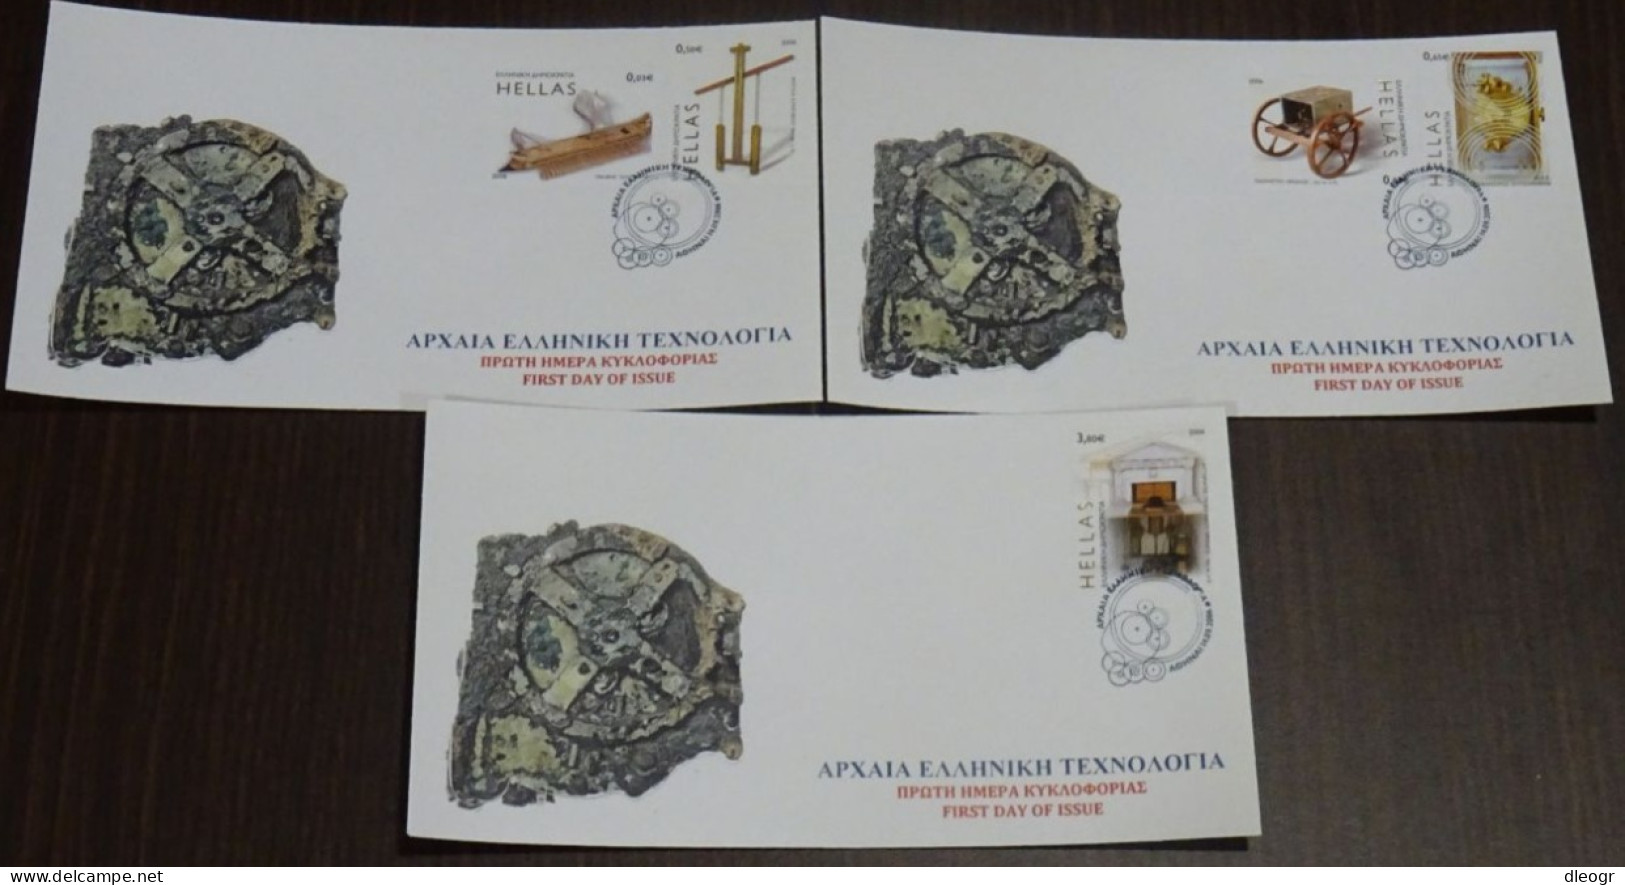 Greece 2006 Ancient Greek Technology Unofficial FDC - FDC